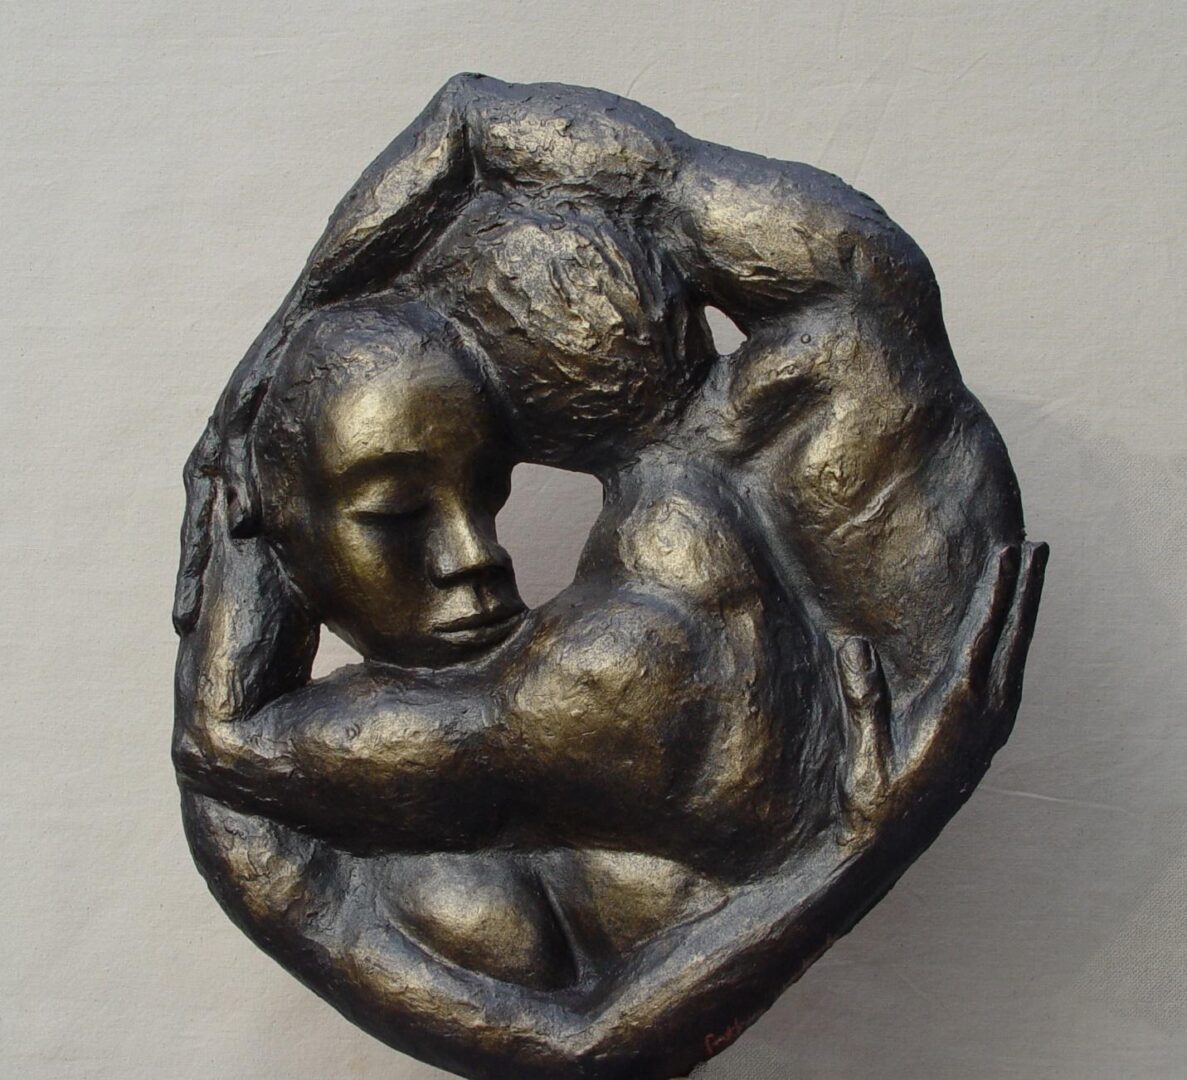 An Umlauf sculpture portraying two people in a heartfelt embrace.